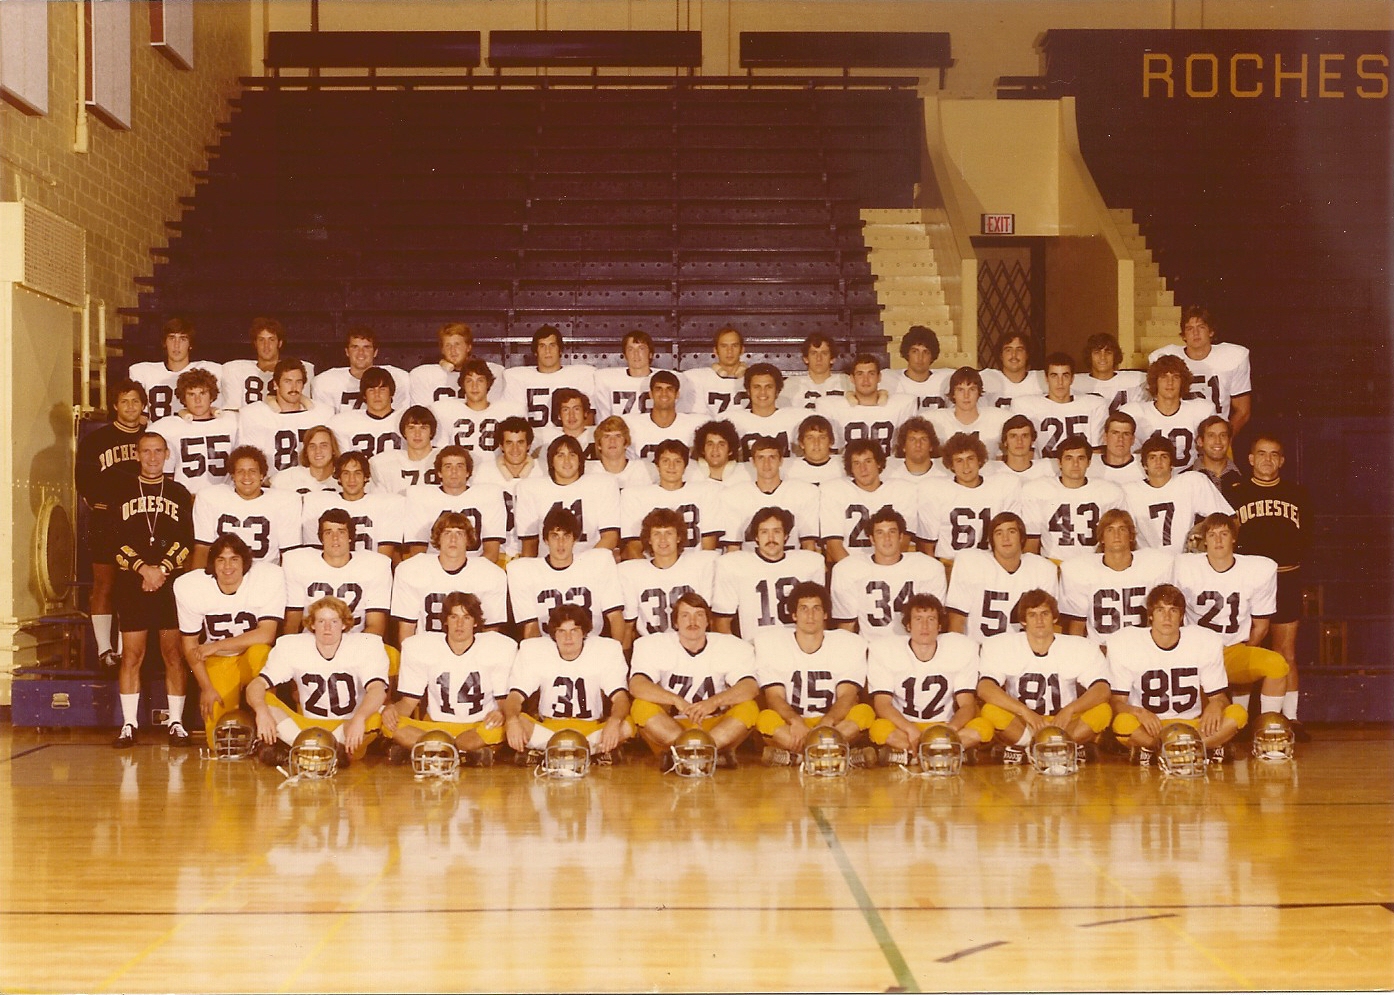 A photo of the 1977 university of rochester football team.